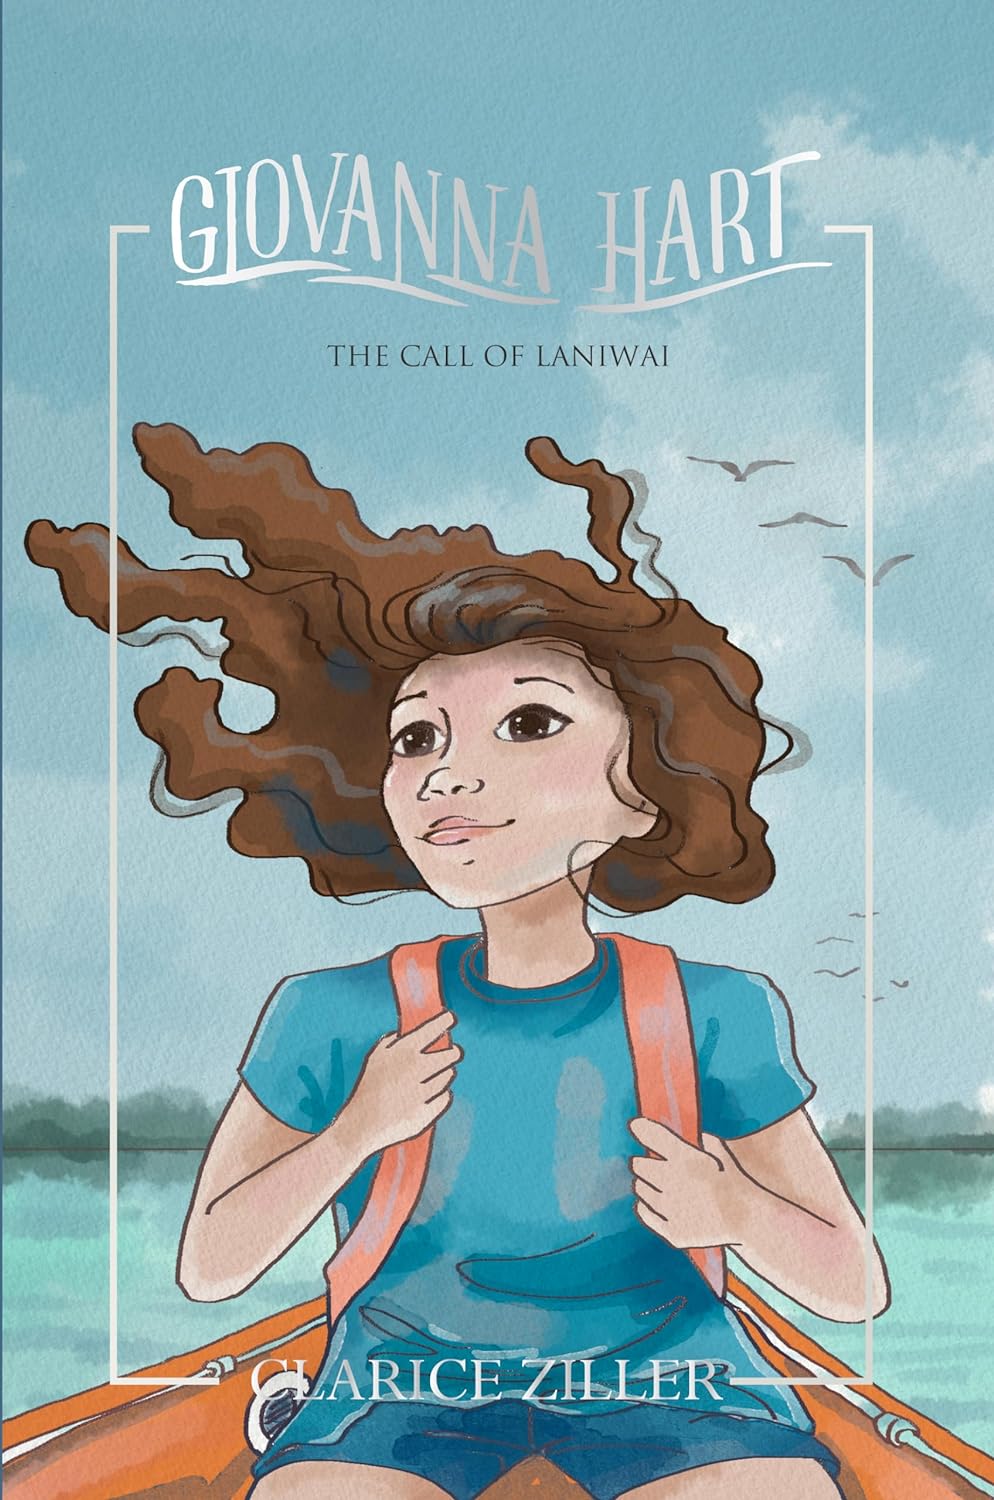 Enchanting New Children's Book, "Giovanna Hart: The Call of Laniwai," Nurtures Hope, Faith, and Adventure